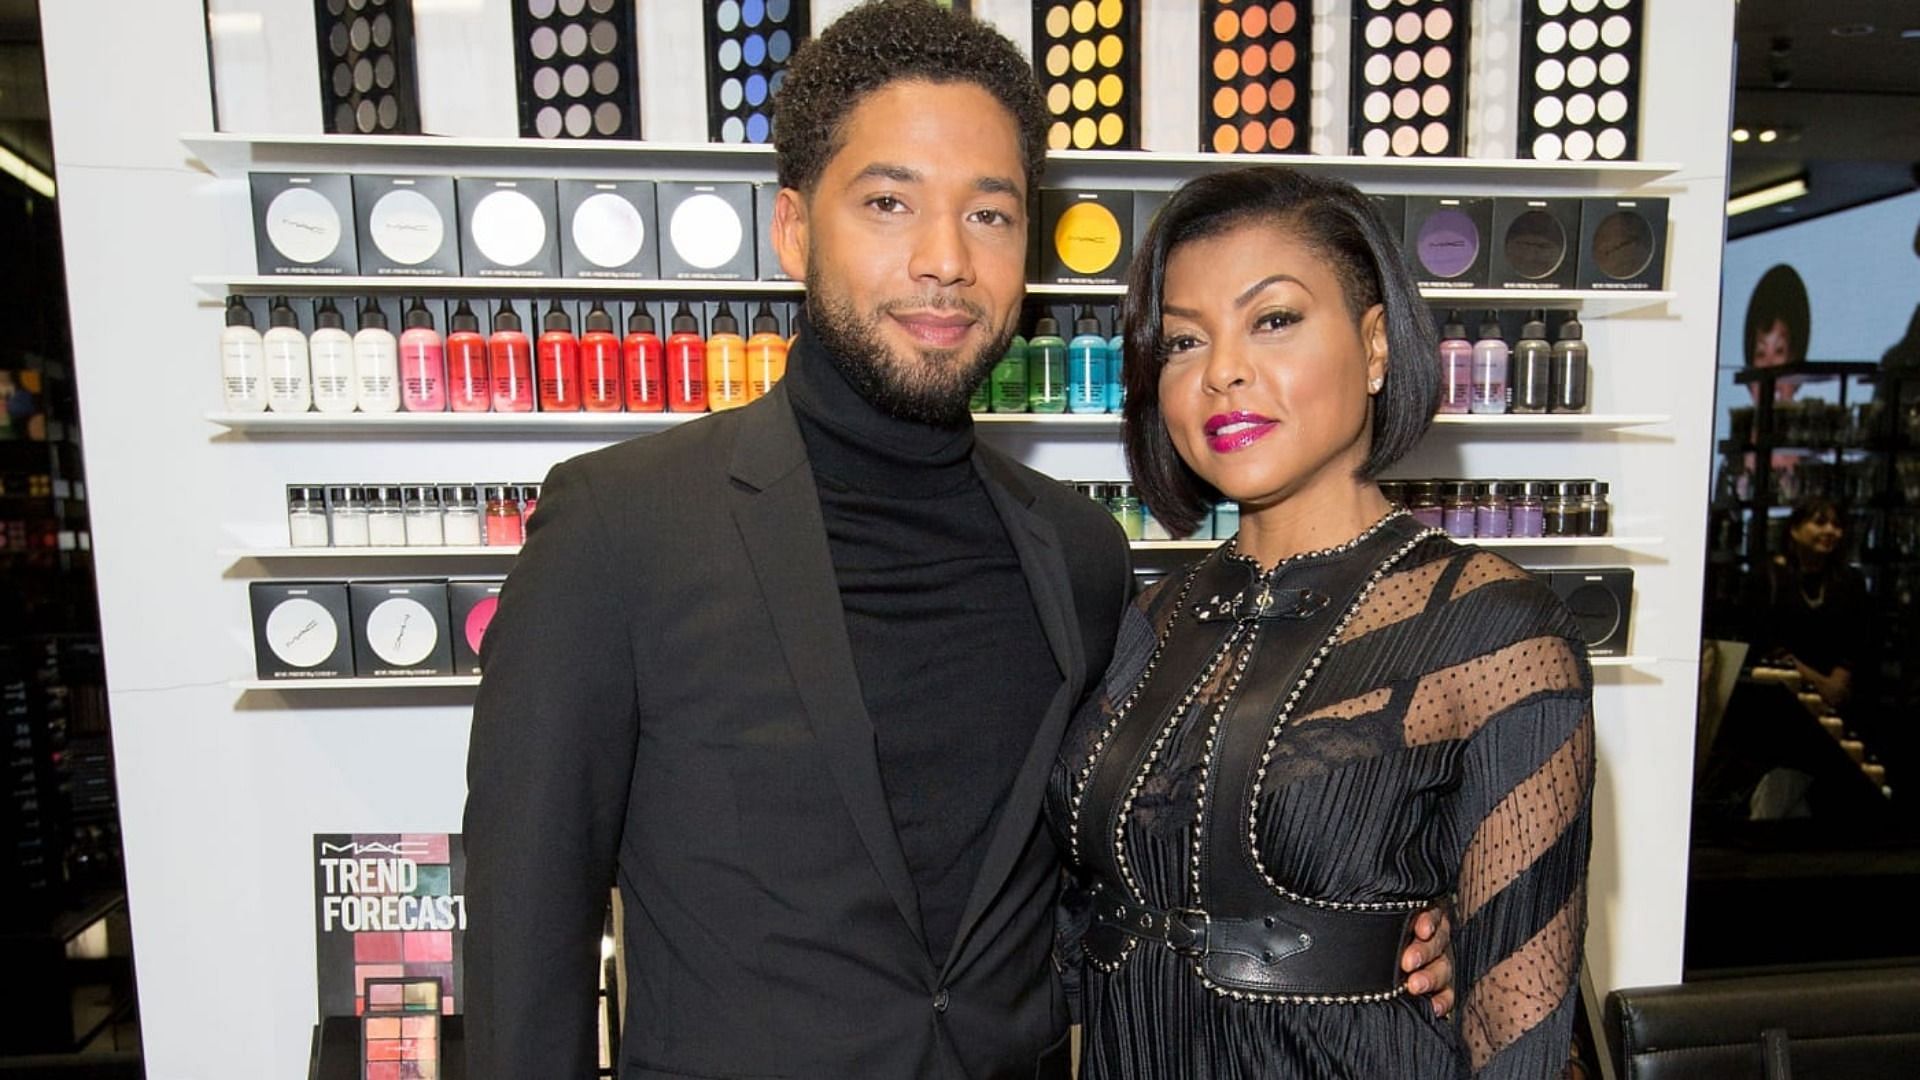 Jussie Smollett was convicted in 2021 for faking a hate crime against him in 2019 (Image via Jeff Schear/Getty Images)